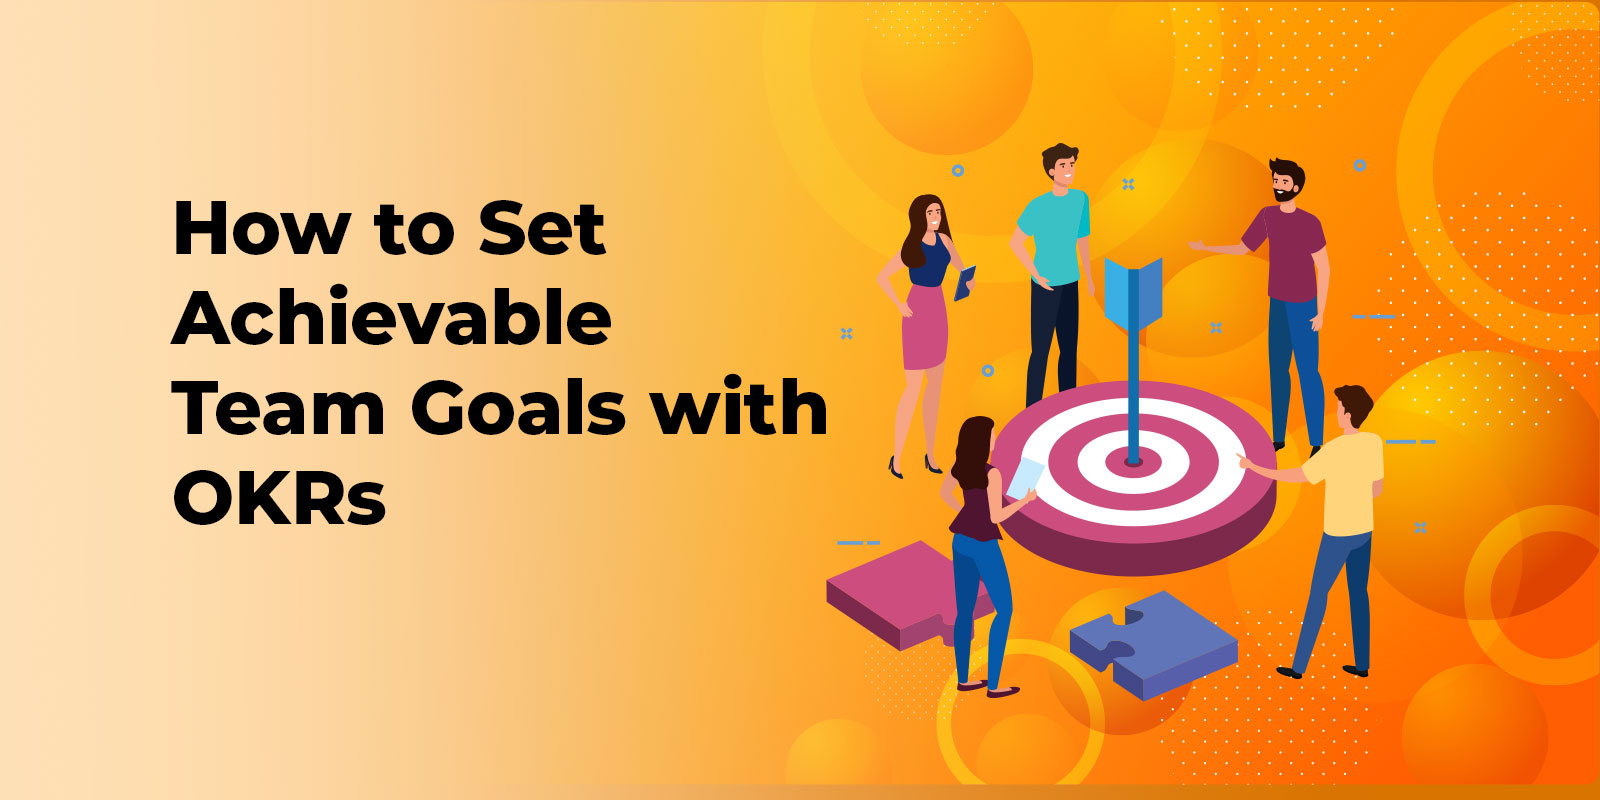 How to Set Achievable Team Goals with OKRs